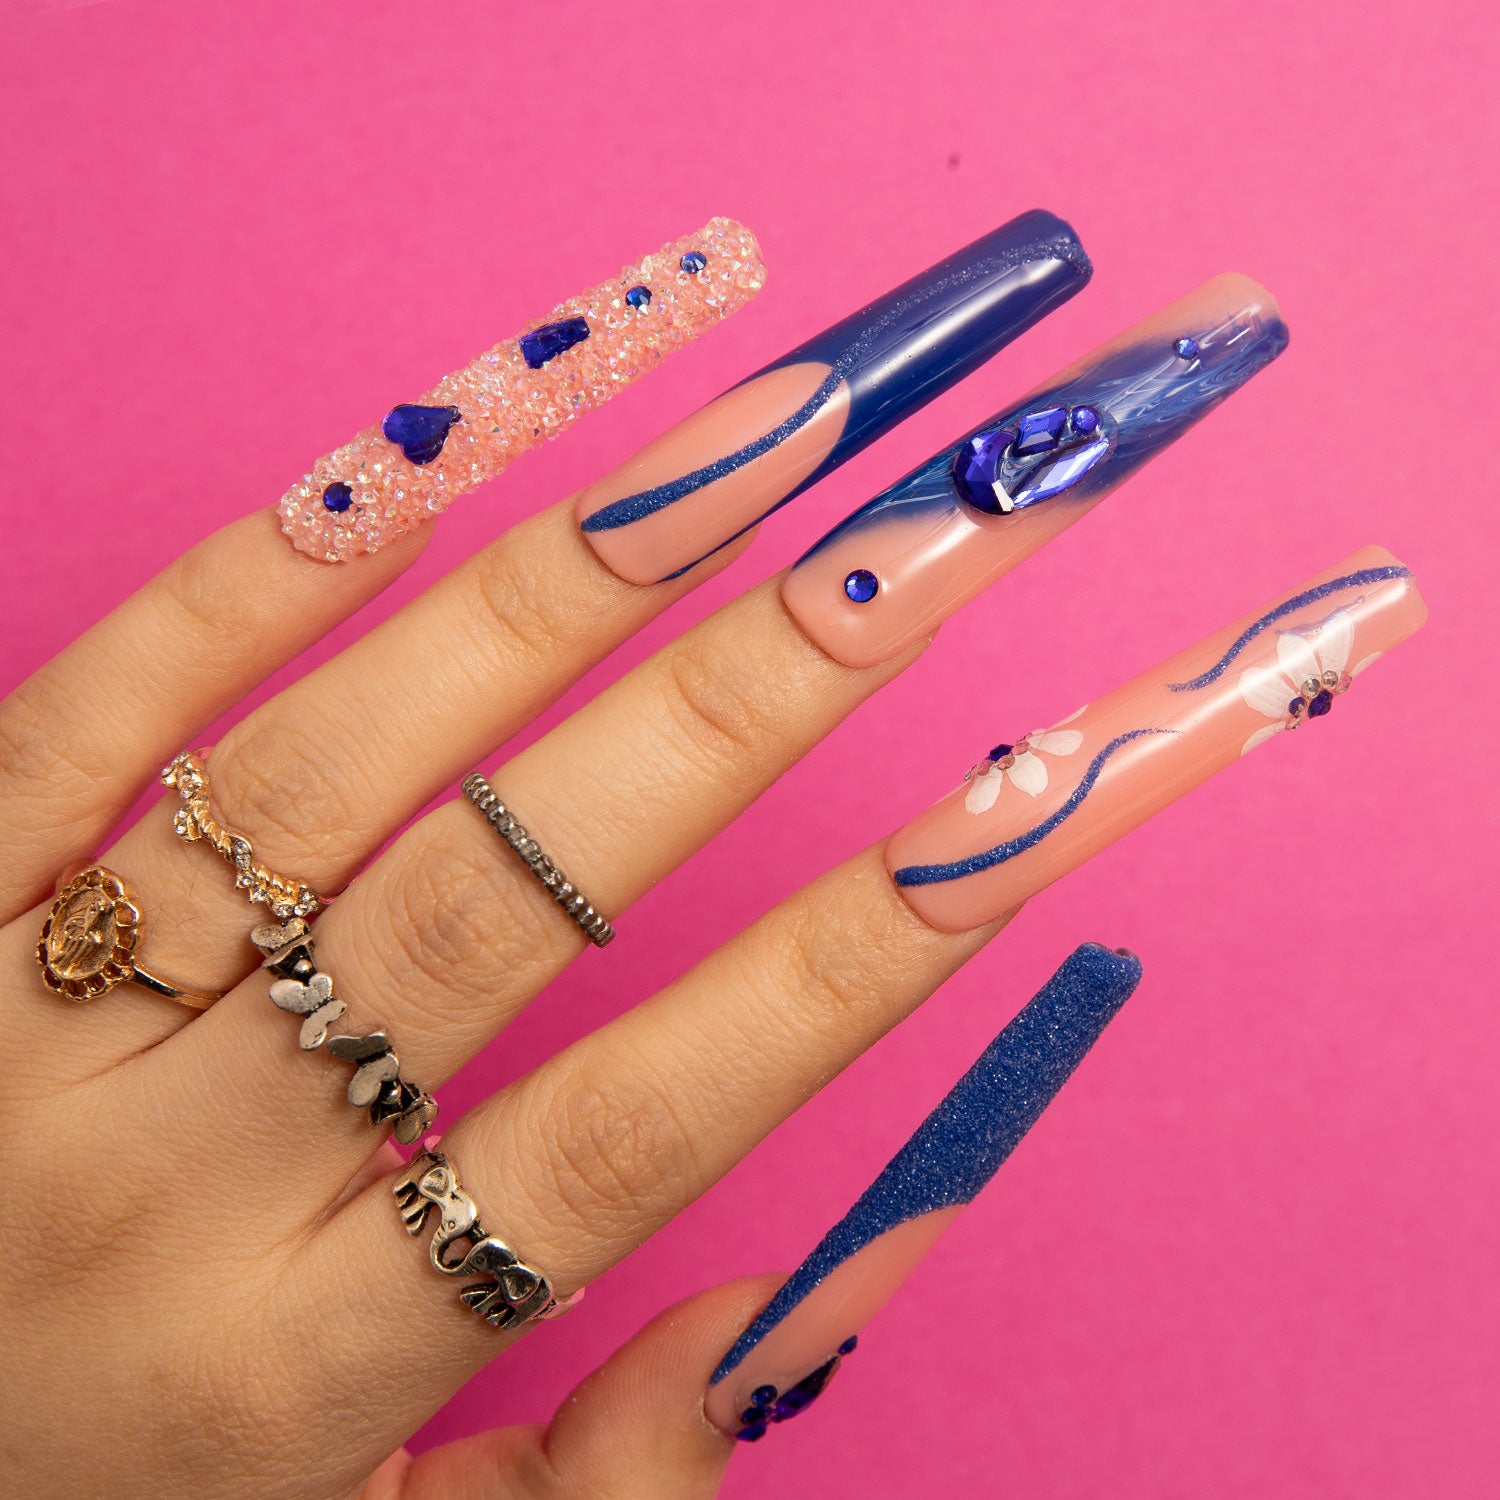 Hand wearing Blue Suede press-on nails with blue French tips, adorned with crystals, blue heart-shaped gems, and floral glitter designs against a pink background.